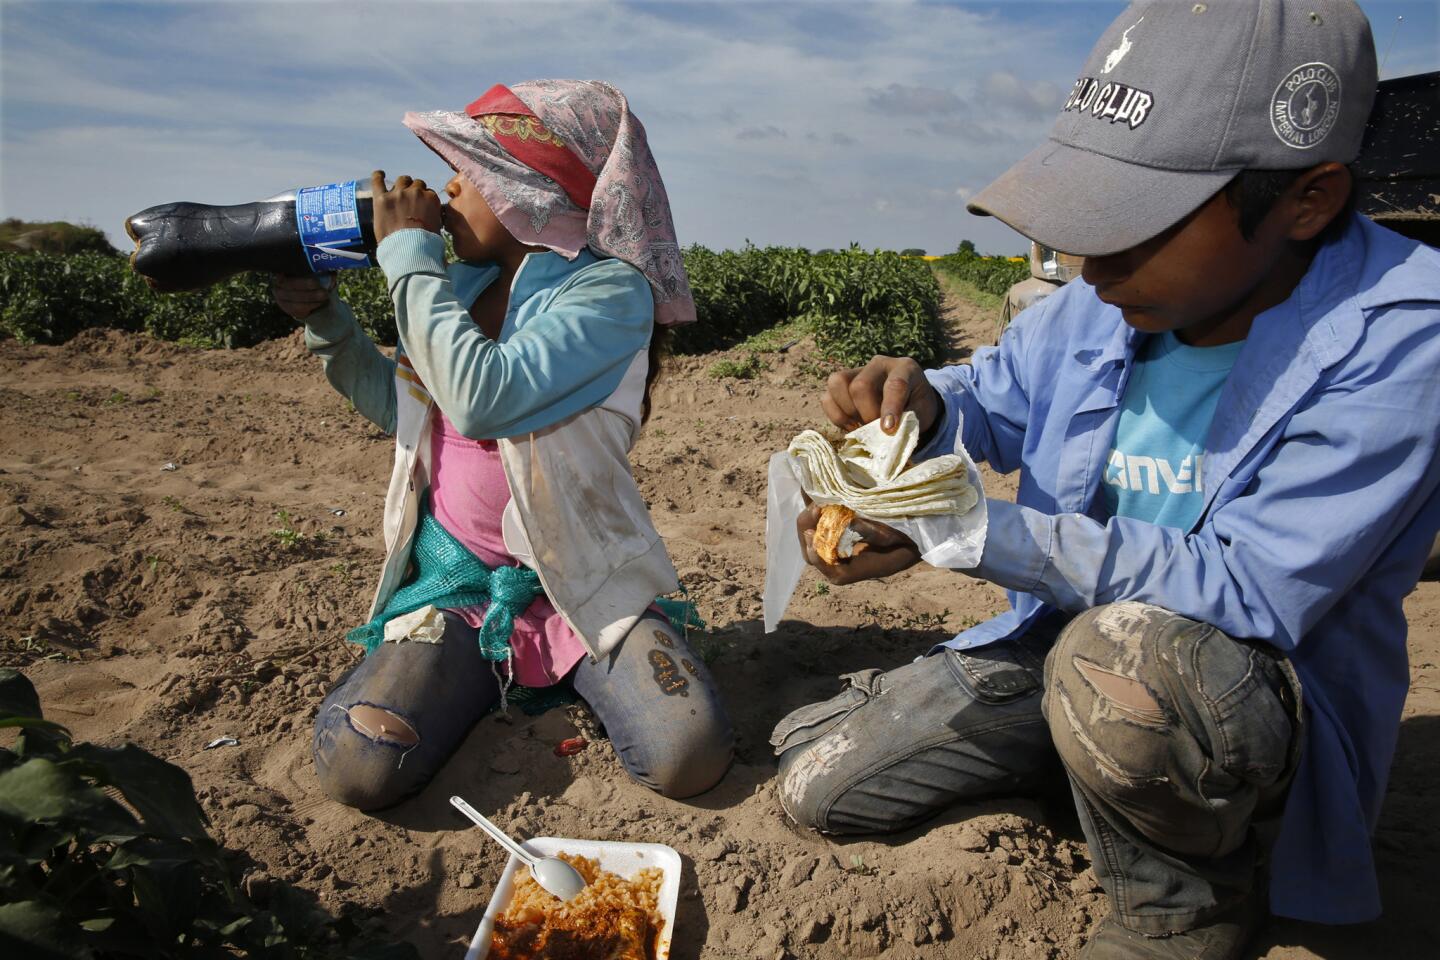 Alejandrina Castillo and her brother Fidel have lunch in a chile pepper field in Teacapan, Sinaloa.